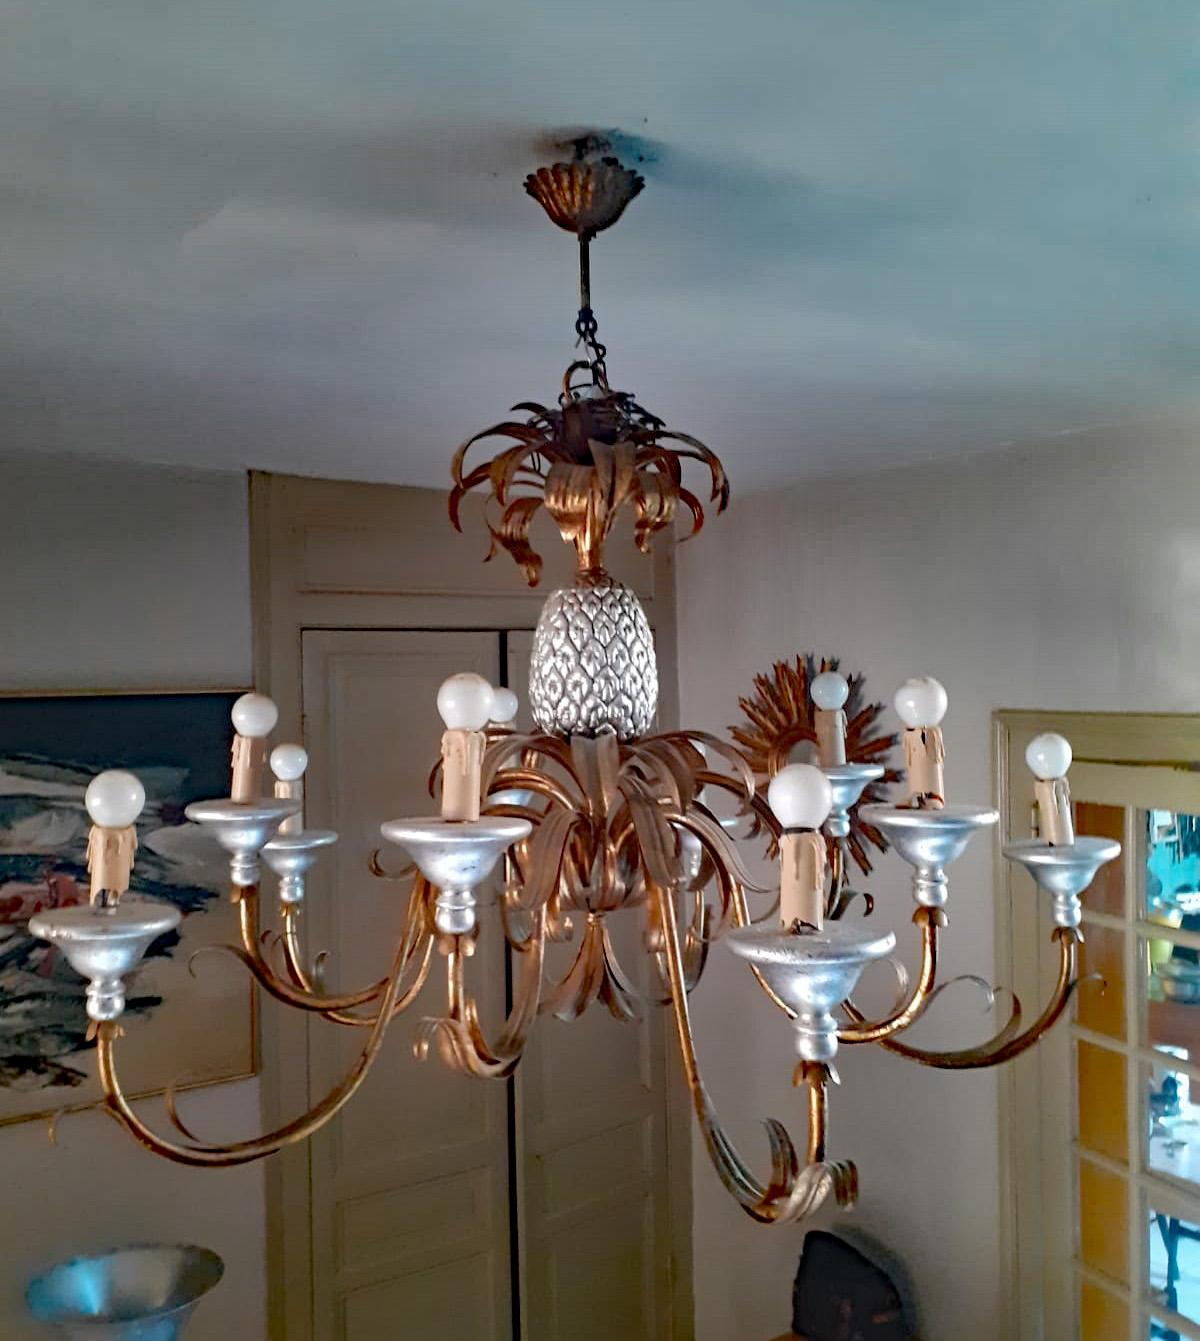 Large gilt metal and wood chandelier 10 lights
Good condition.
 